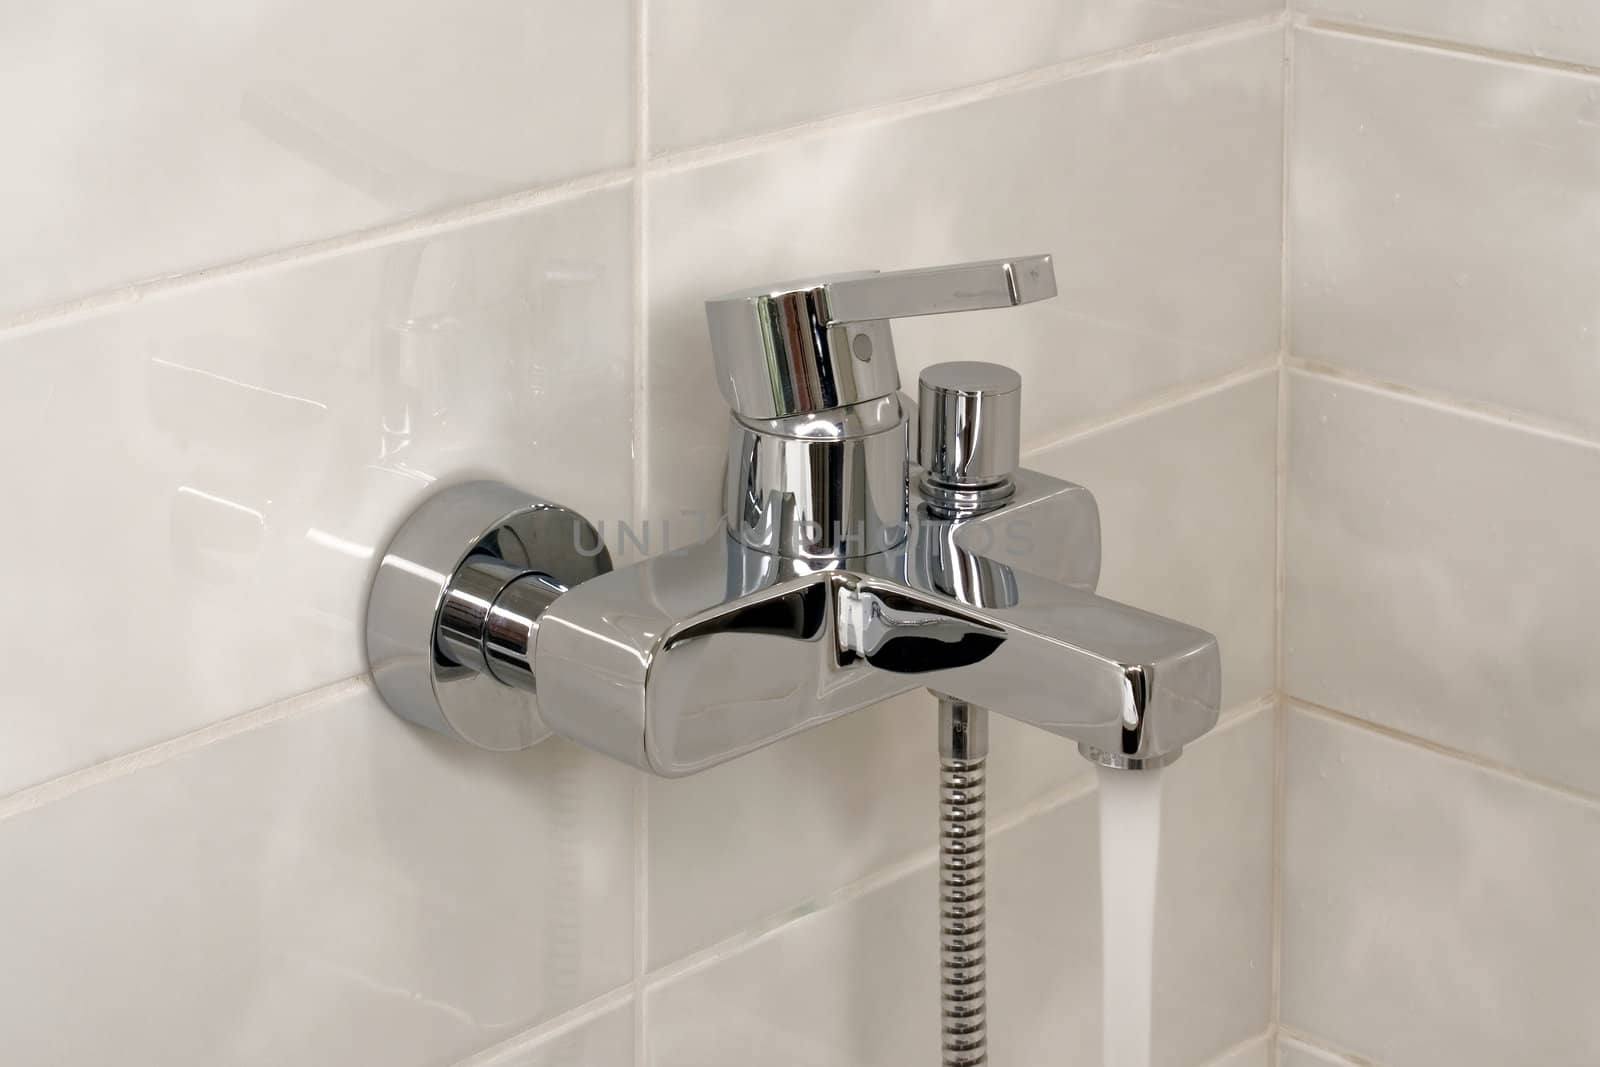 Water stream from modern faucet